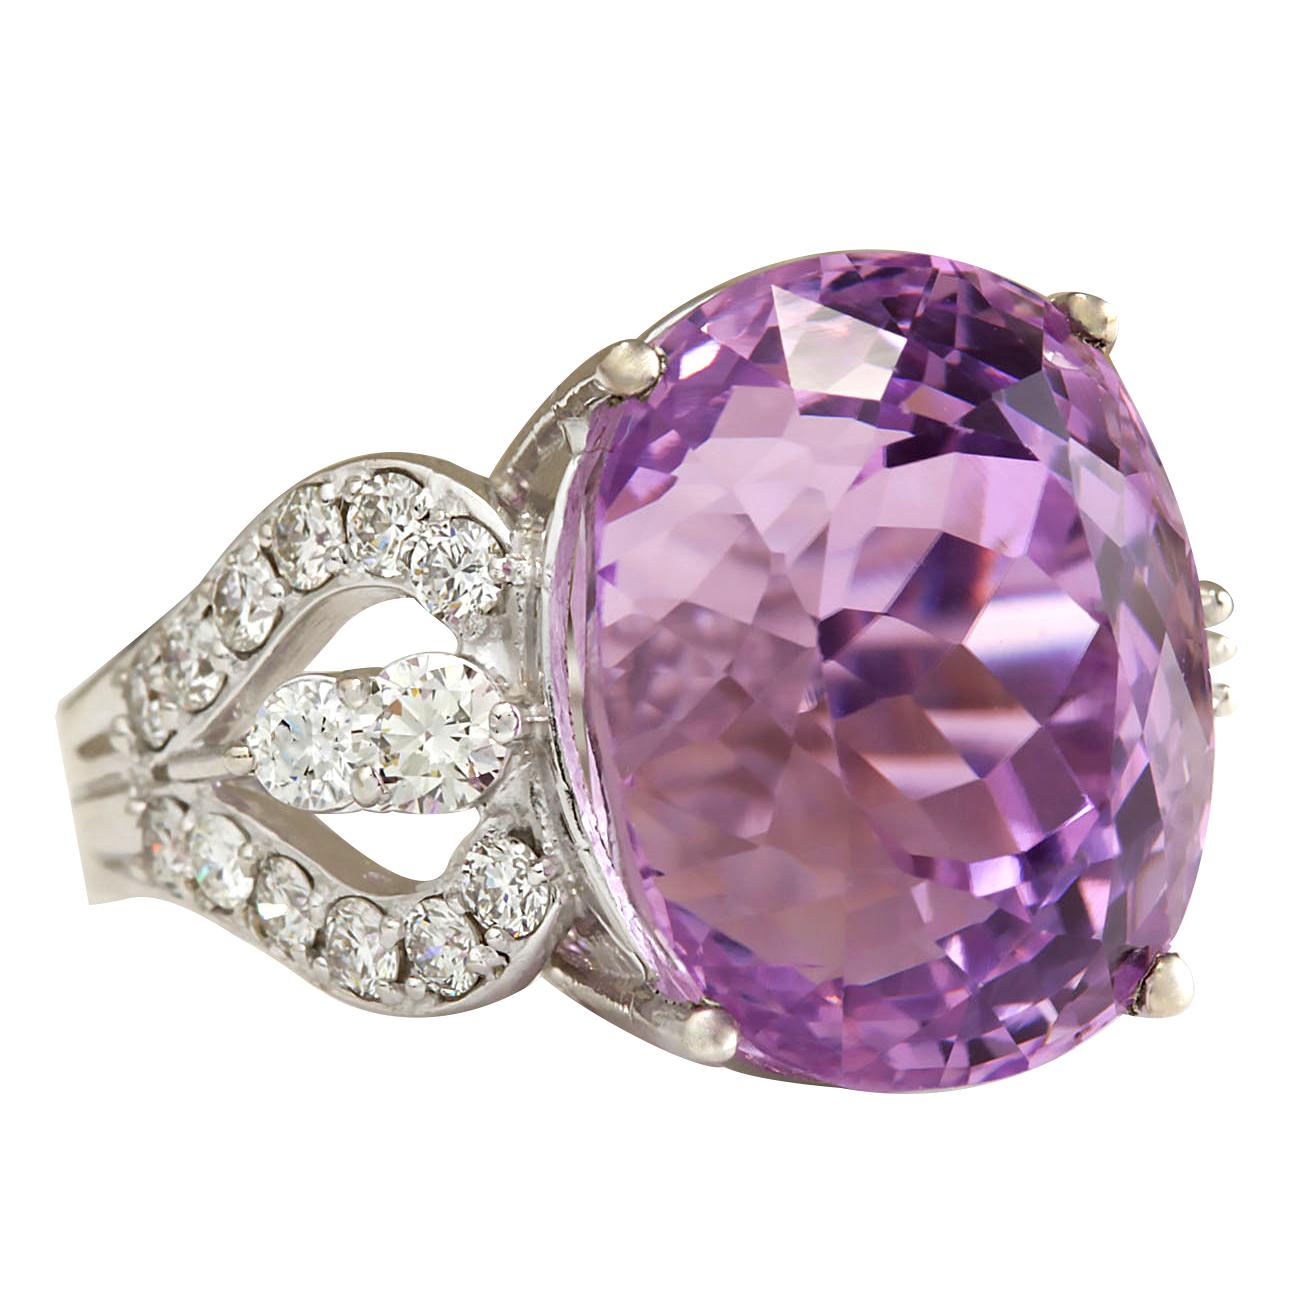 Stamped: 14K White Gold
Total Ring Weight: 8.0 Grams
Total Natural Kunzite Weight is 21.38 Carat (Measures: 16.00x12.00 mm)
Color: Pink
Total Natural Diamond Weight is 1.00 Carat
Color: F-G, Clarity: VS2-SI1
Face Measures: 16.00x13.35 mm
Sku: